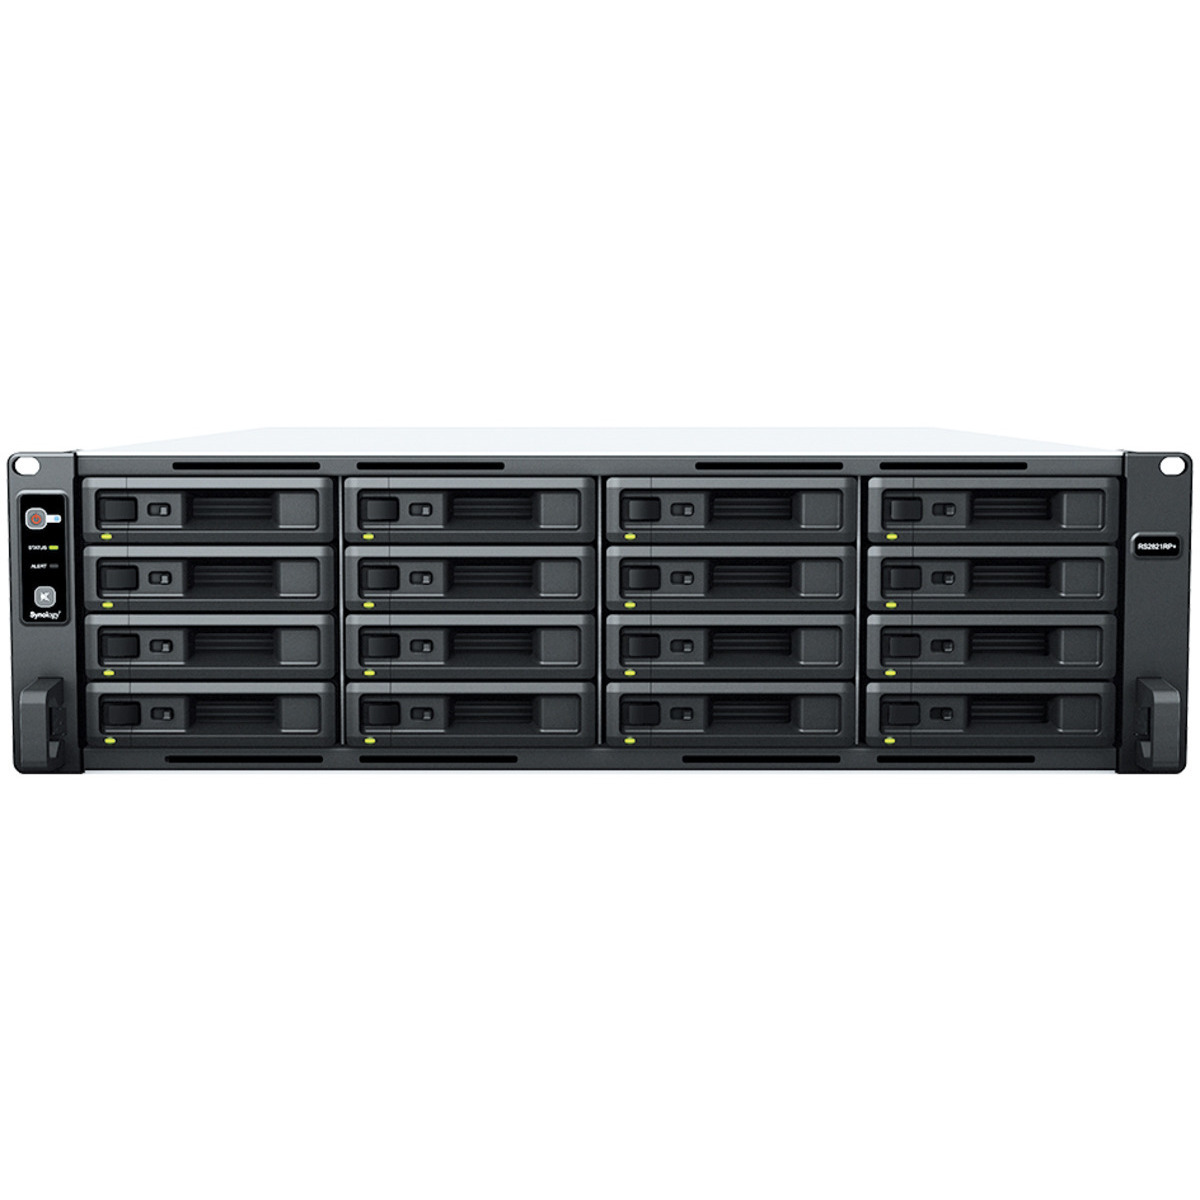 Synology RackStation RS2821RP+ 156tb 16-Bay RackMount Large Business / Enterprise NAS - Network Attached Storage Device 13x12tb Western Digital Red Pro WD121KFBX 3.5 7200rpm SATA 6Gb/s HDD NAS Class Drives Installed - Burn-In Tested RackStation RS2821RP+